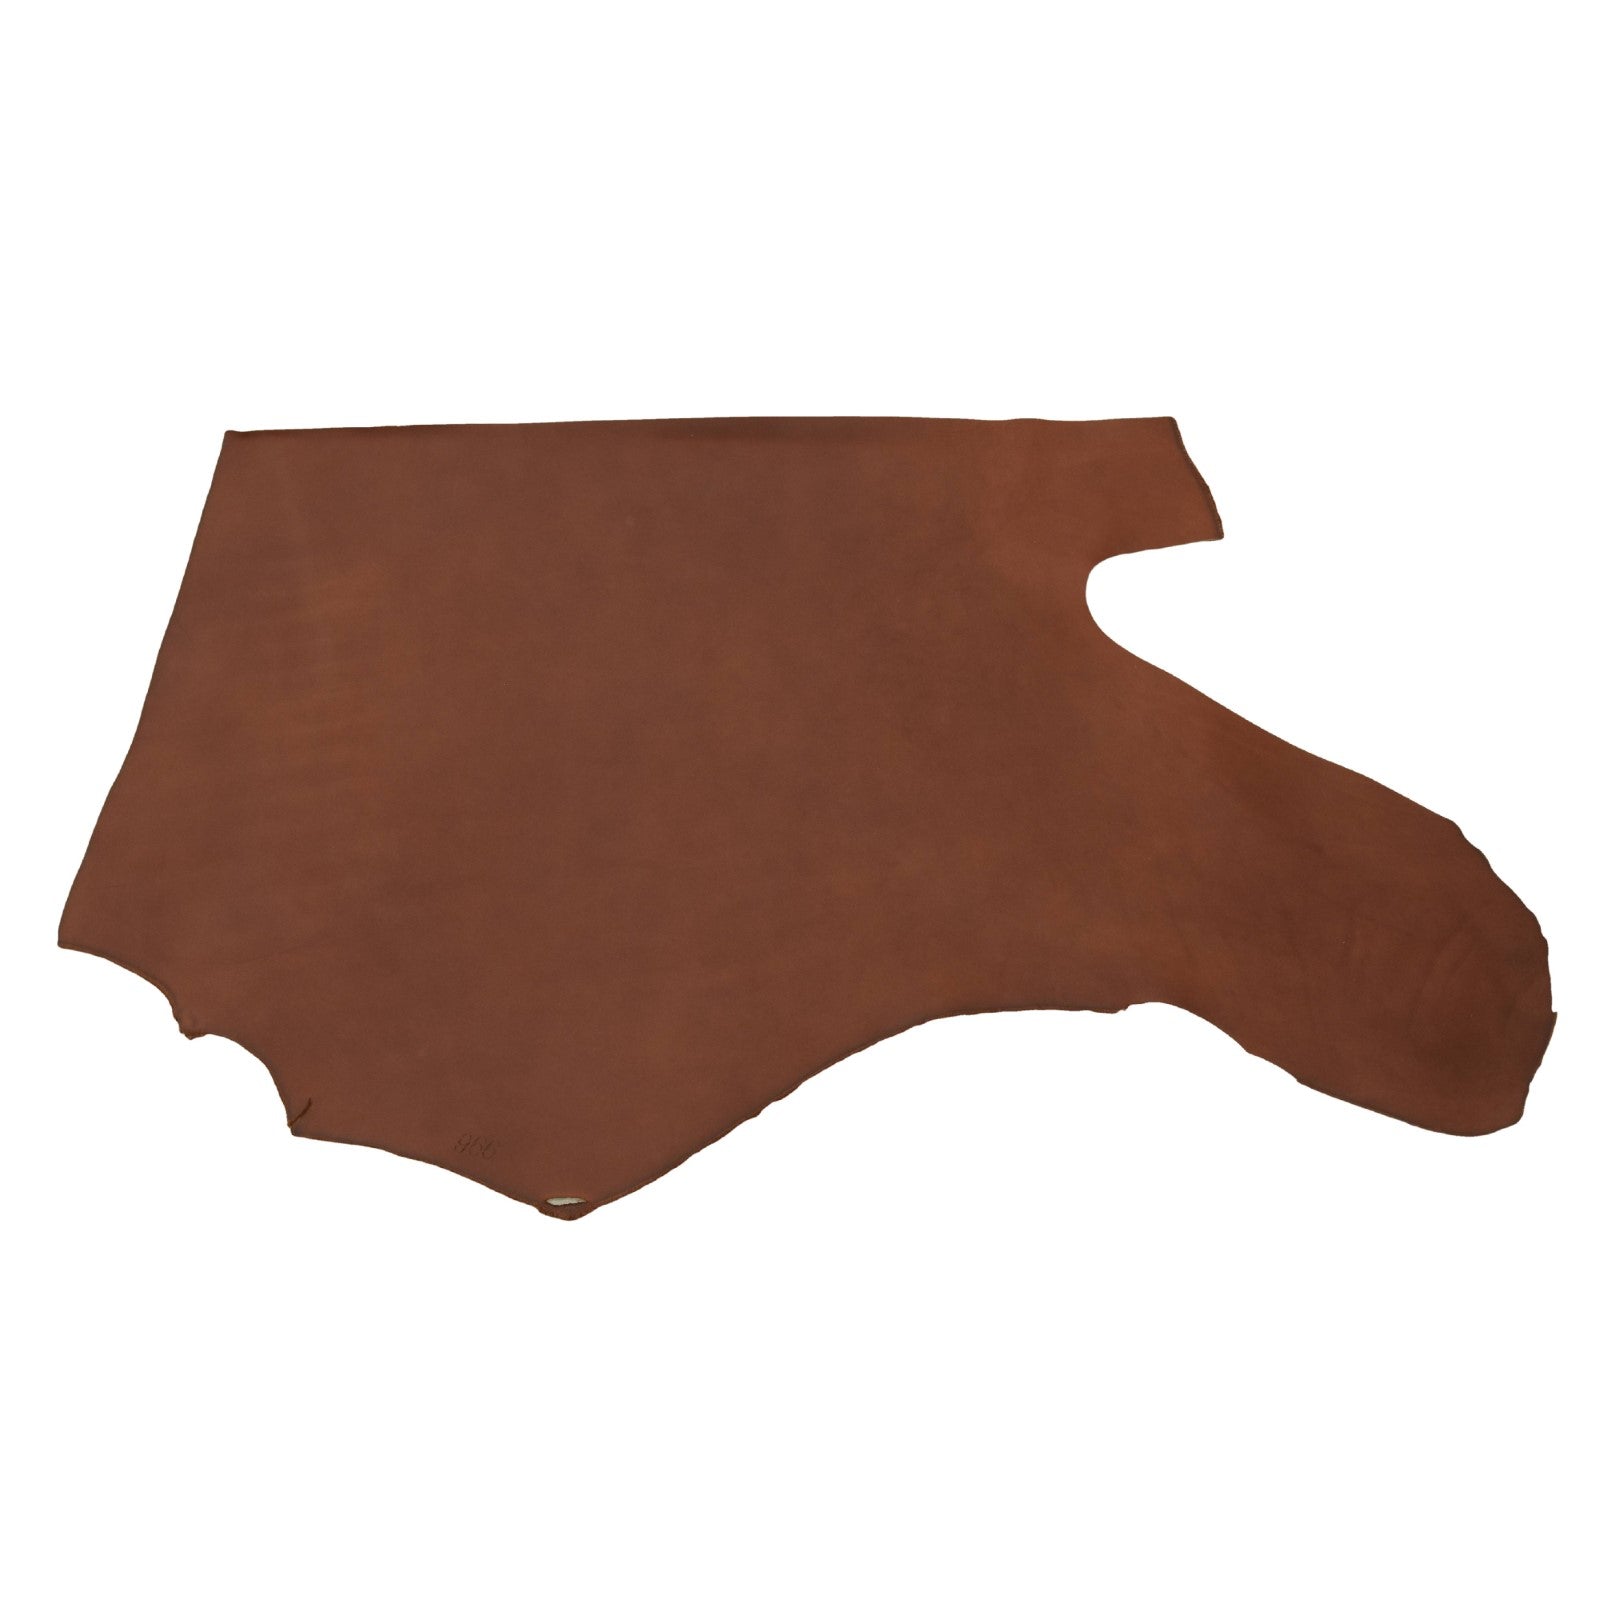 Dark Brown Whiskey River, Oil Tanned Hides, Summits Edge, 6.5-7.5/21-26 Sq Ft, 6.5 - 7.5 Sq Ft / Project Piece (Bottom) | The Leather Guy